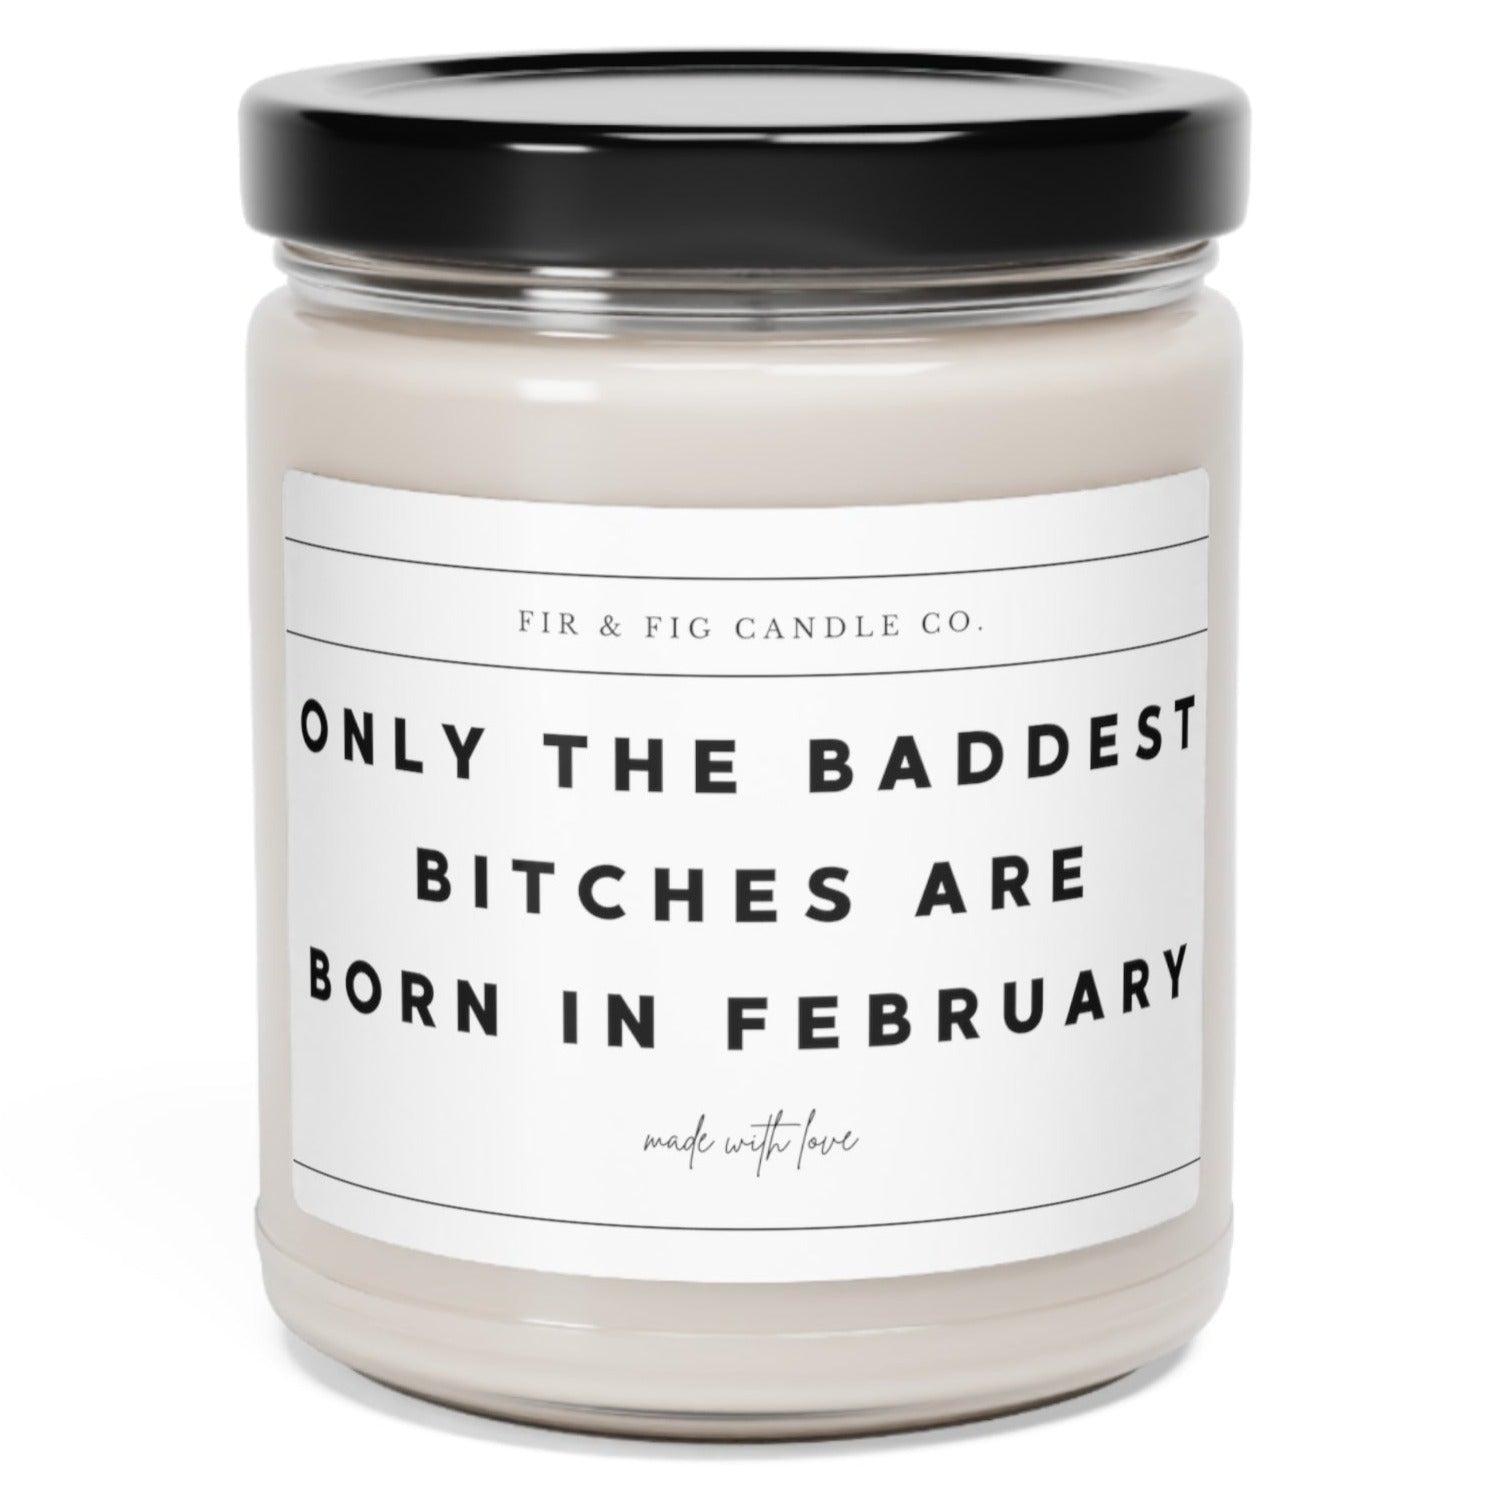 Only the Baddest Bitches are born in February - friend gift, February gift, gift for her, candle gift for her, Aquarius Gift, Pisces Gift